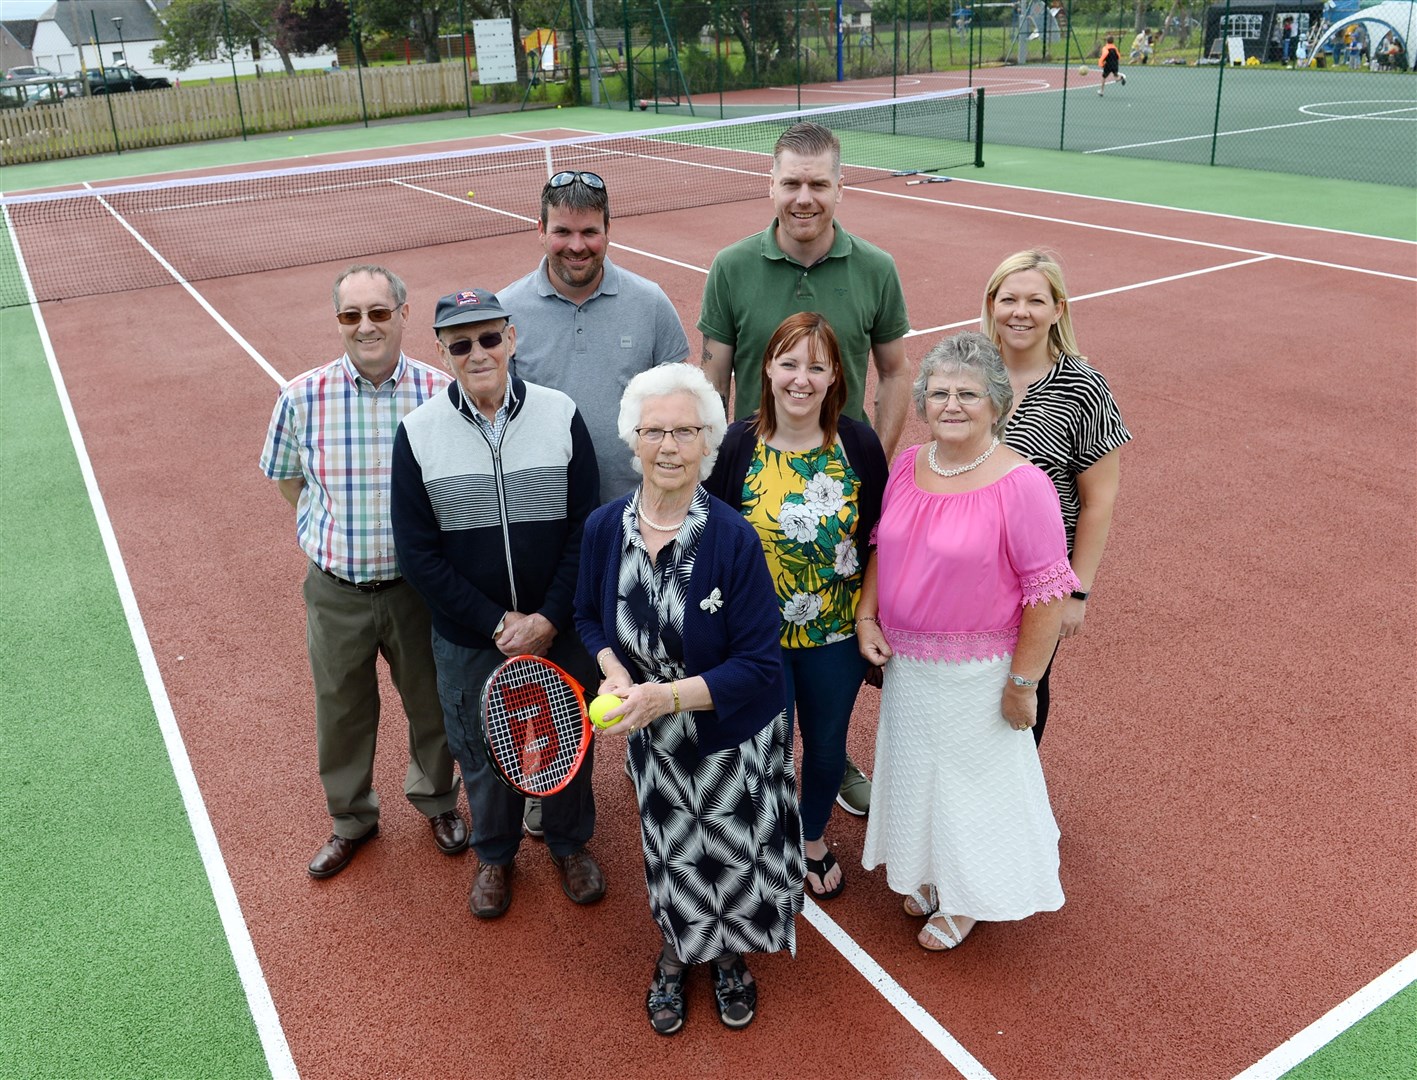 Honour of first serve on new court went to Moira Reid (82), five times winner of Avoch championship with representatives of Avoch Amenities Association, councillors and representatives of Rosehaugh Estate.. Picture: Gary Anthony. Image No.044150